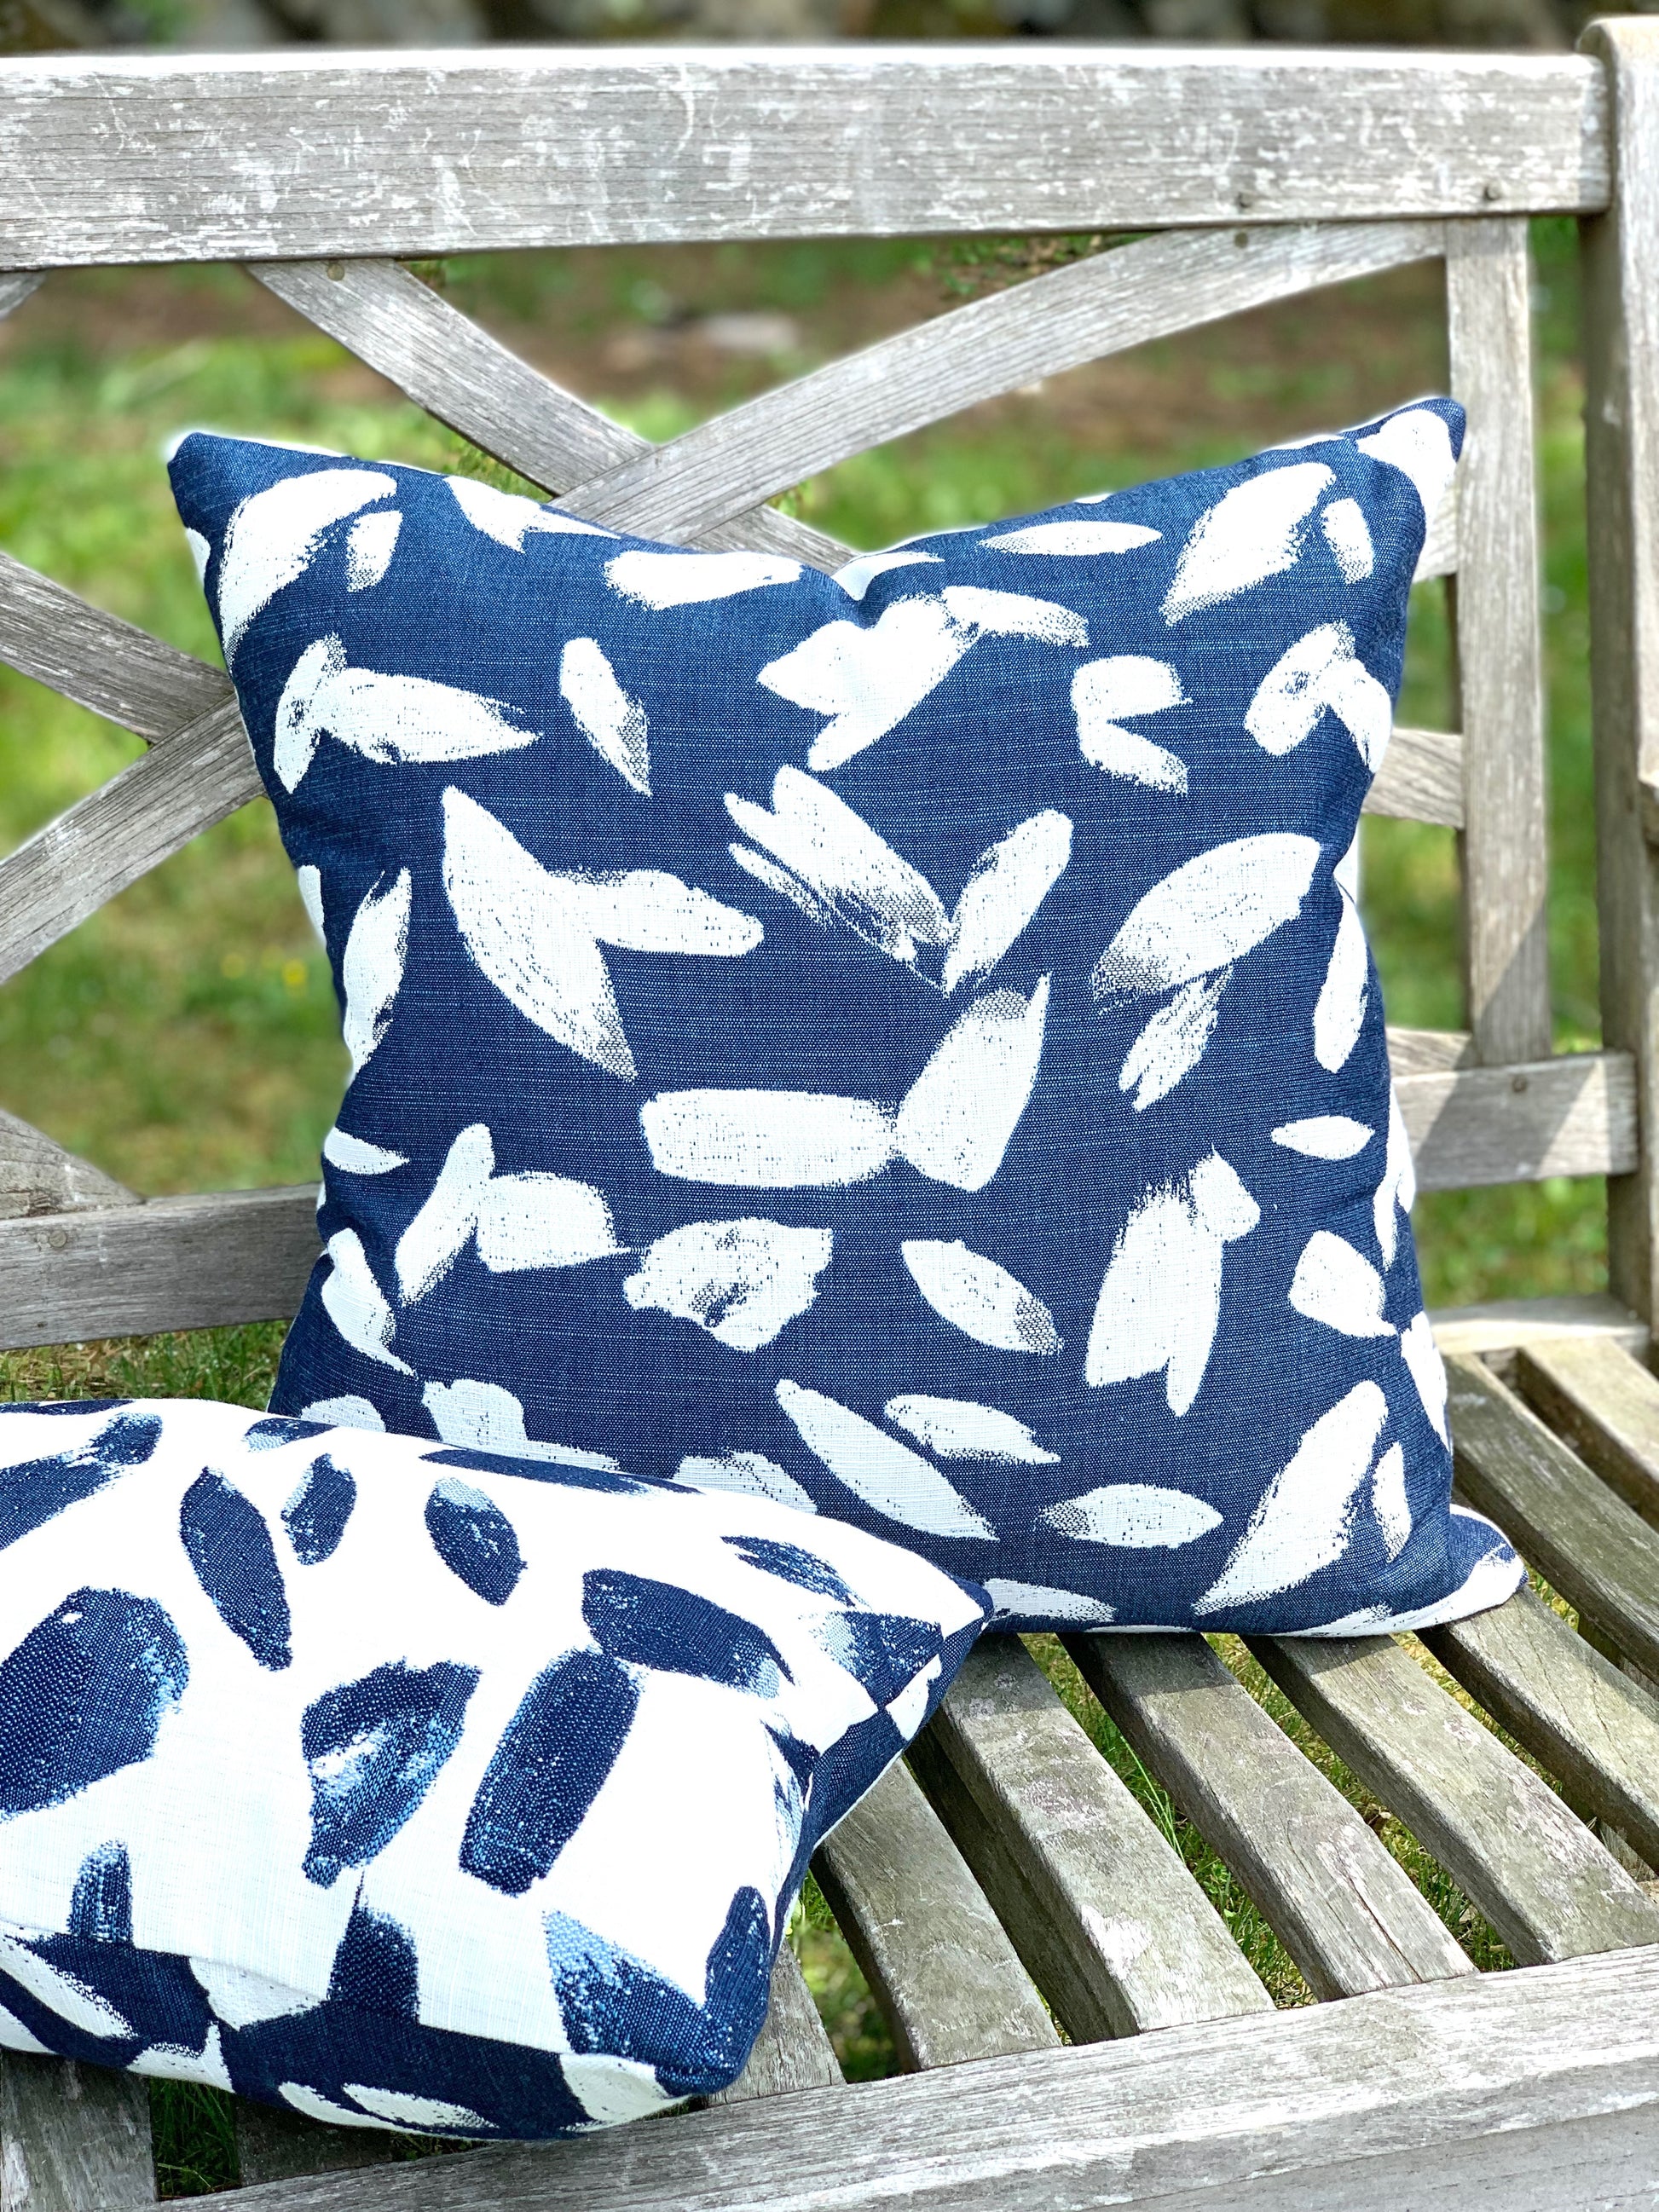 Blue and white outdoor designer pillow with reversible fabric by Perennials